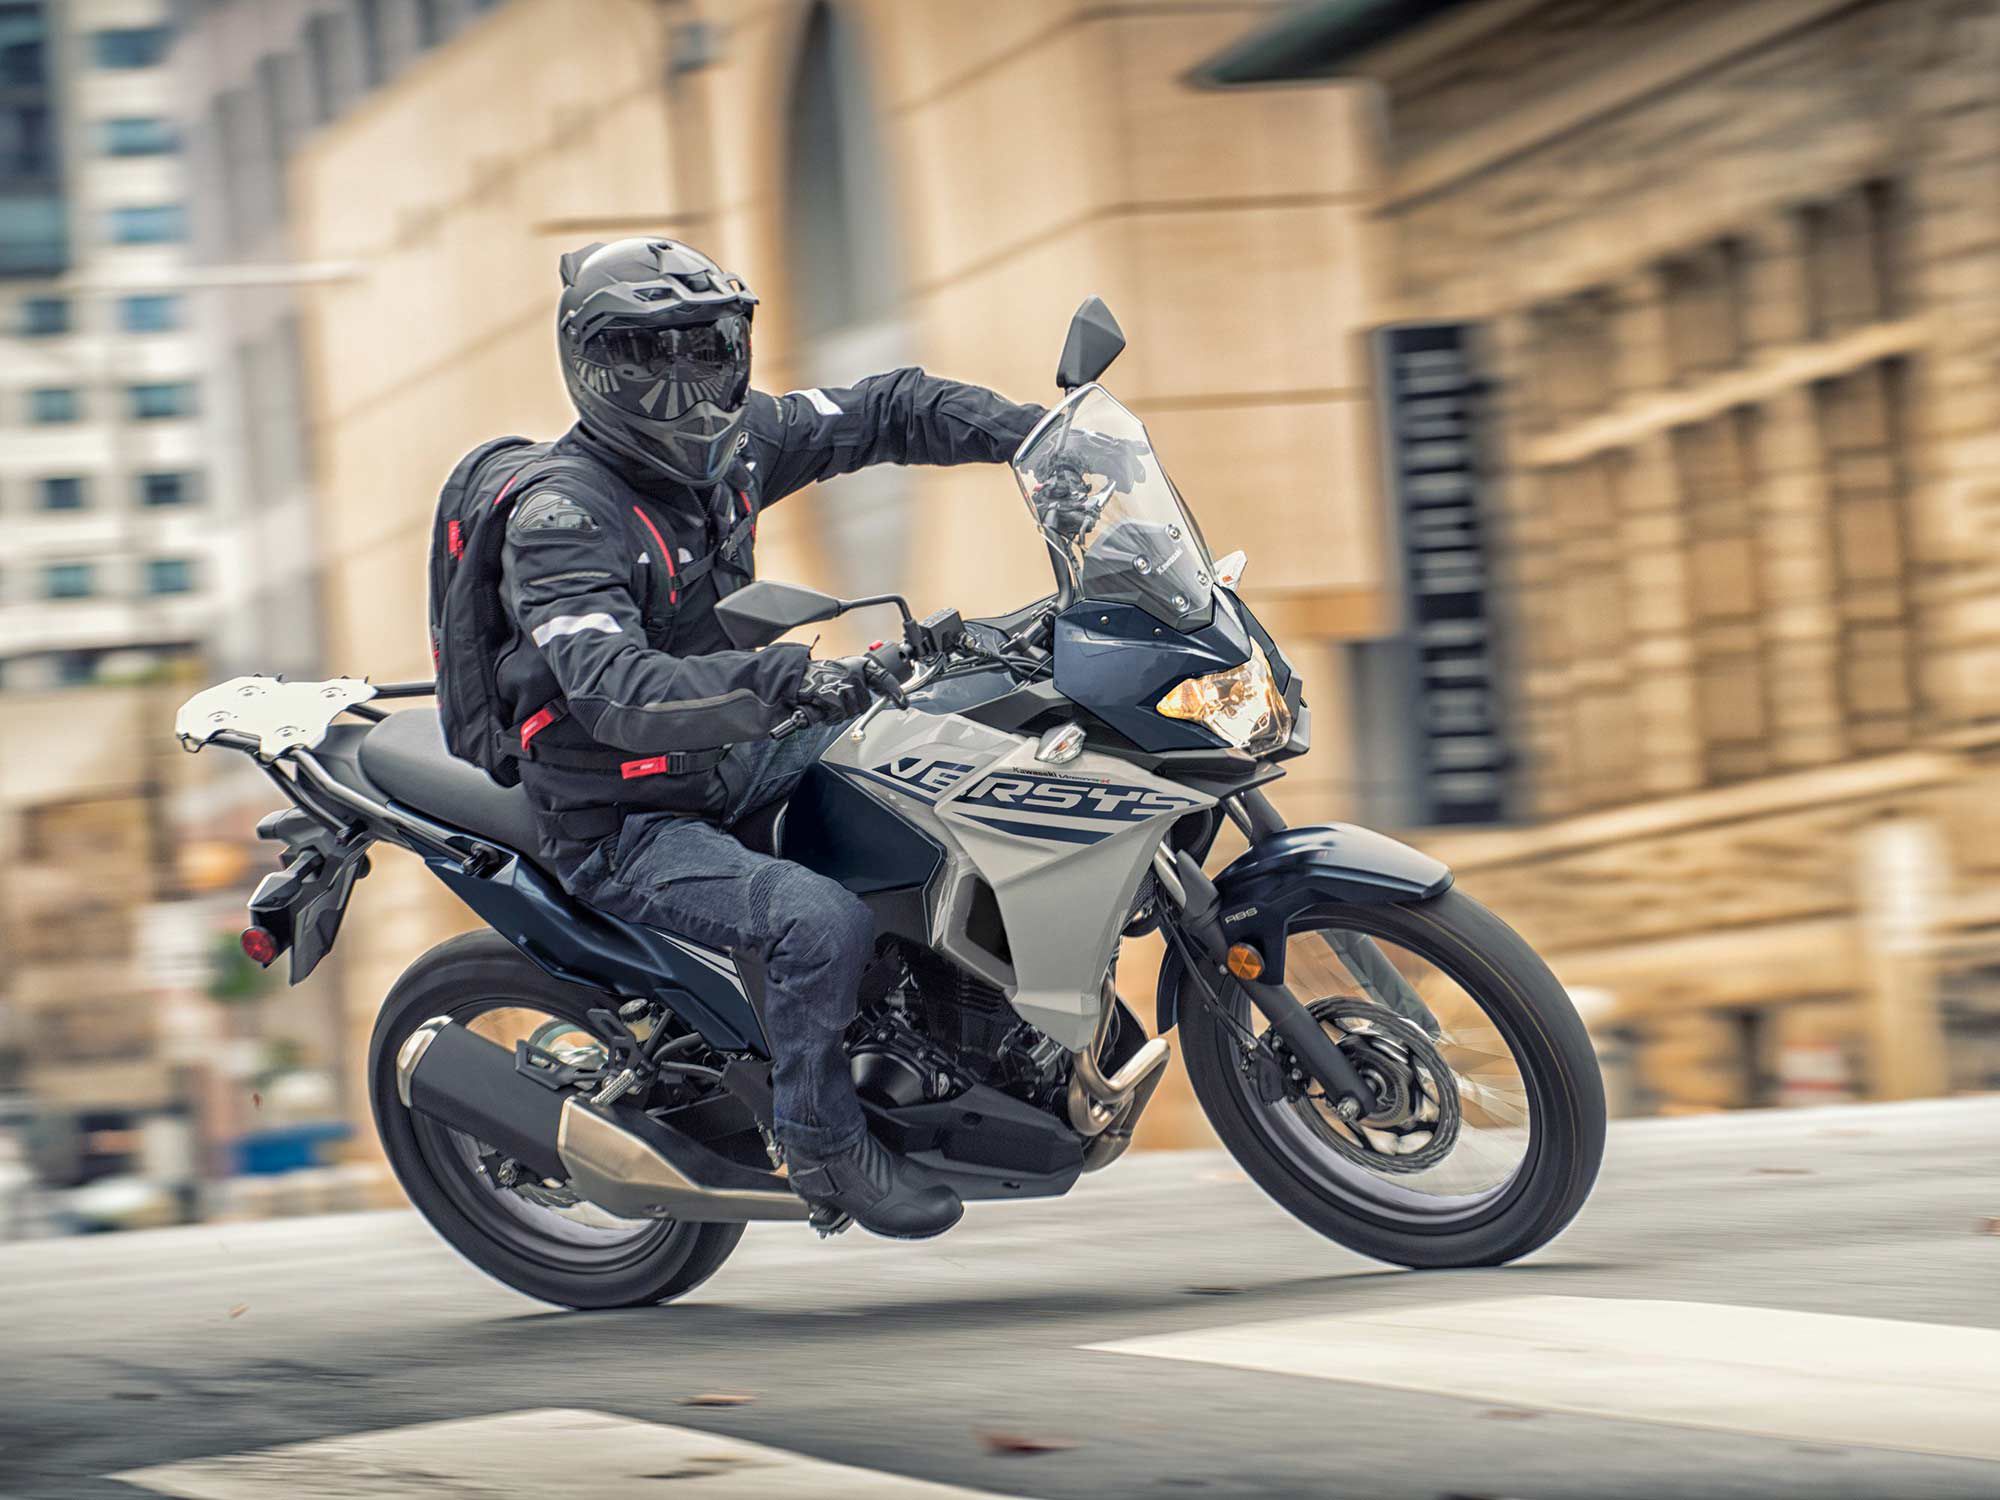 The Kawasaki Versys-X 300 is a tidy little package that a new rider will love.